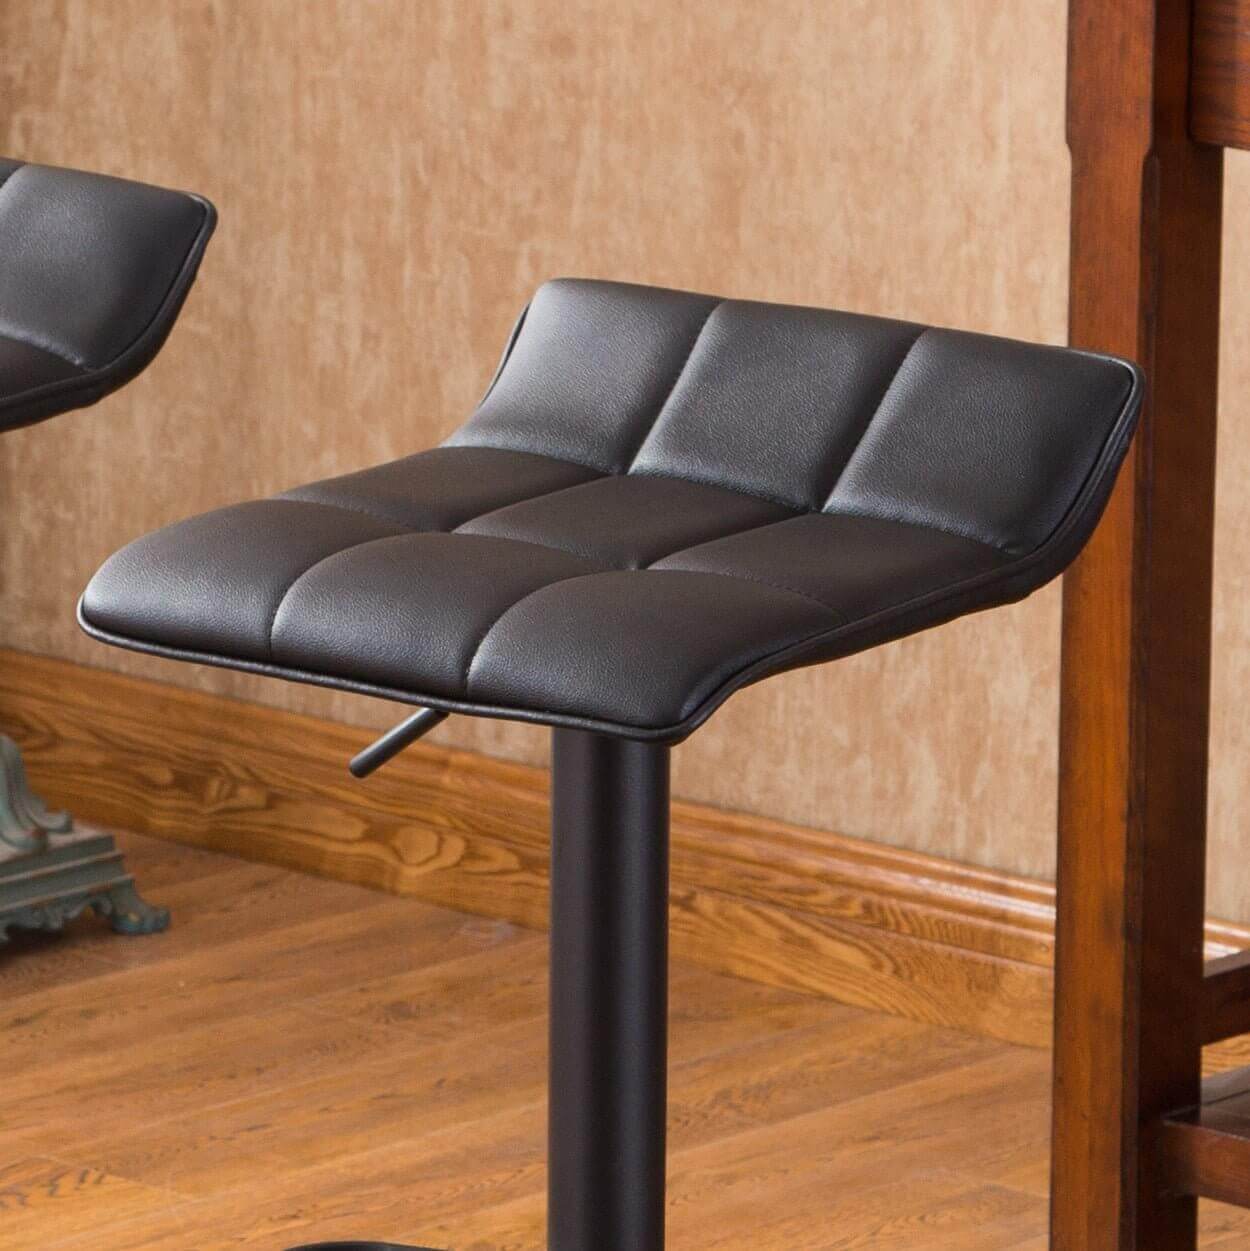 Black cushioned swivel bar stool with bonded leather seat in a dining room setting